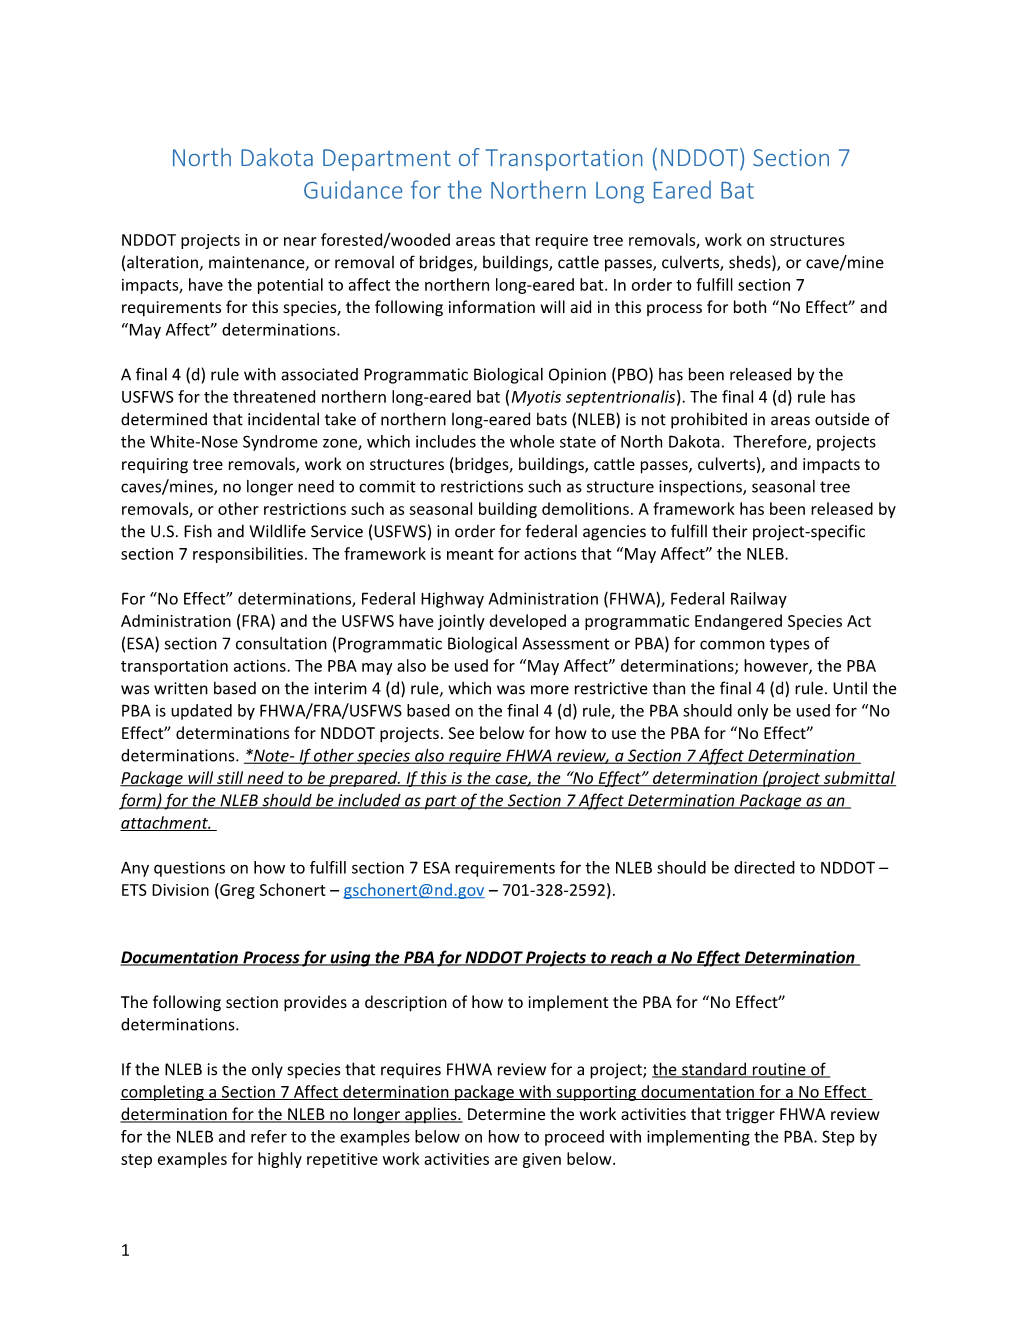 North Dakota Department of Transportation (NDDOT)Section 7 Guidance for the Northern Long